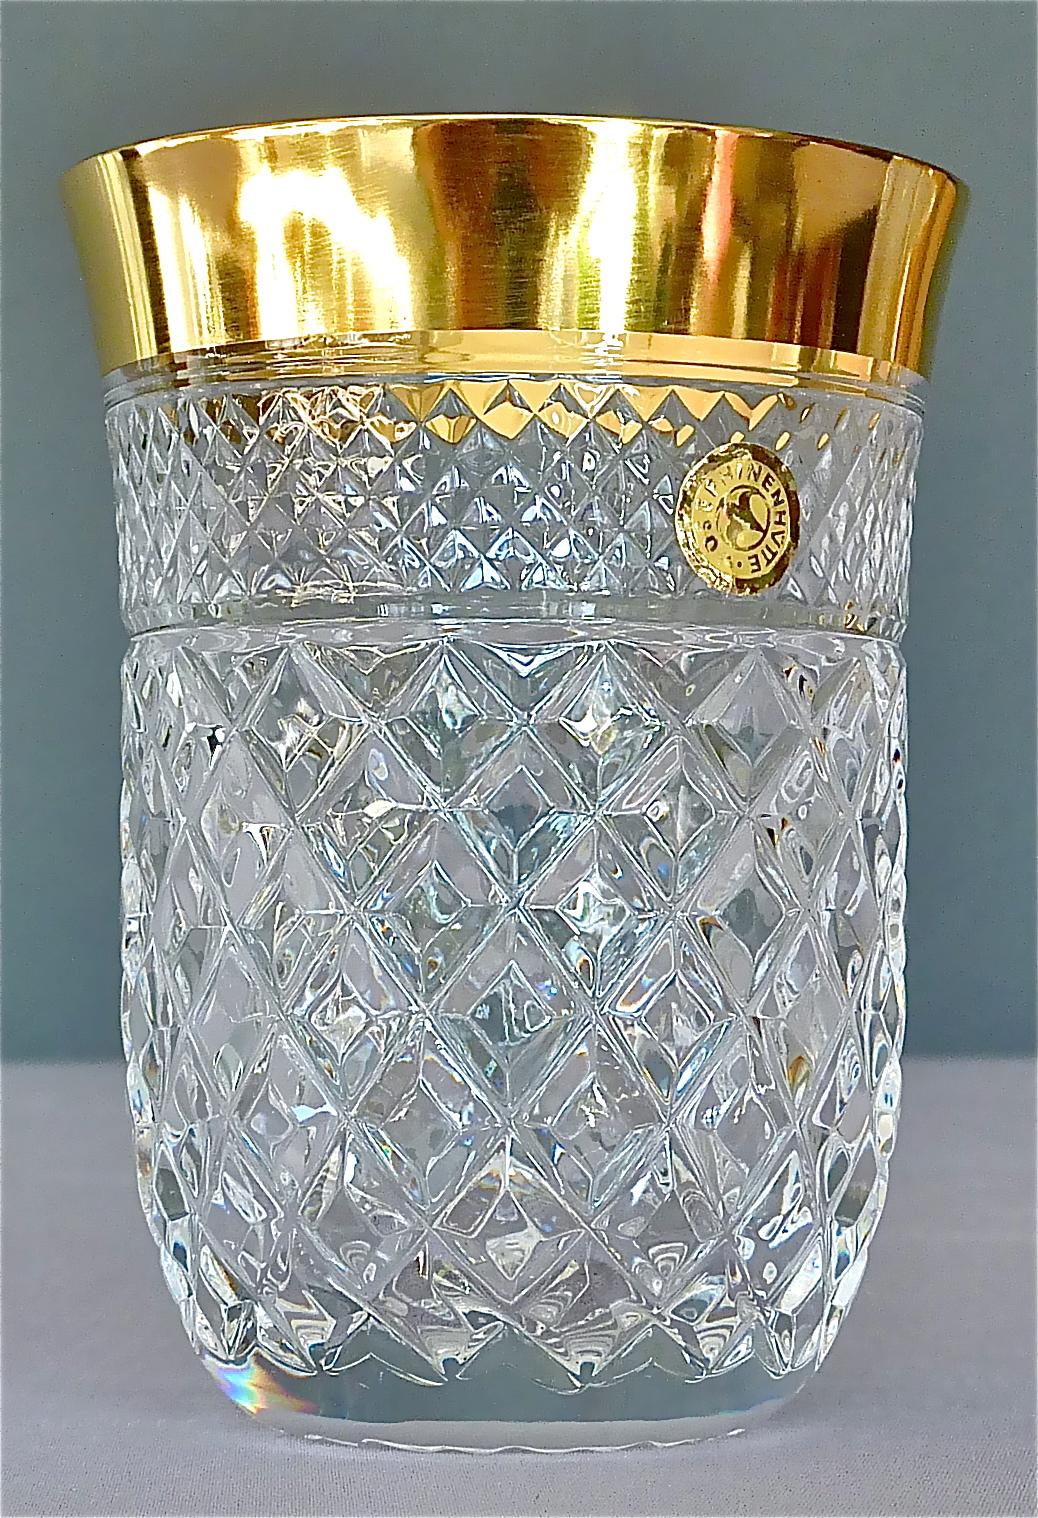 Set of 24 Crystal Gold Josephinenhuette Glasses Champagne Wine Beer Water 1970s 8